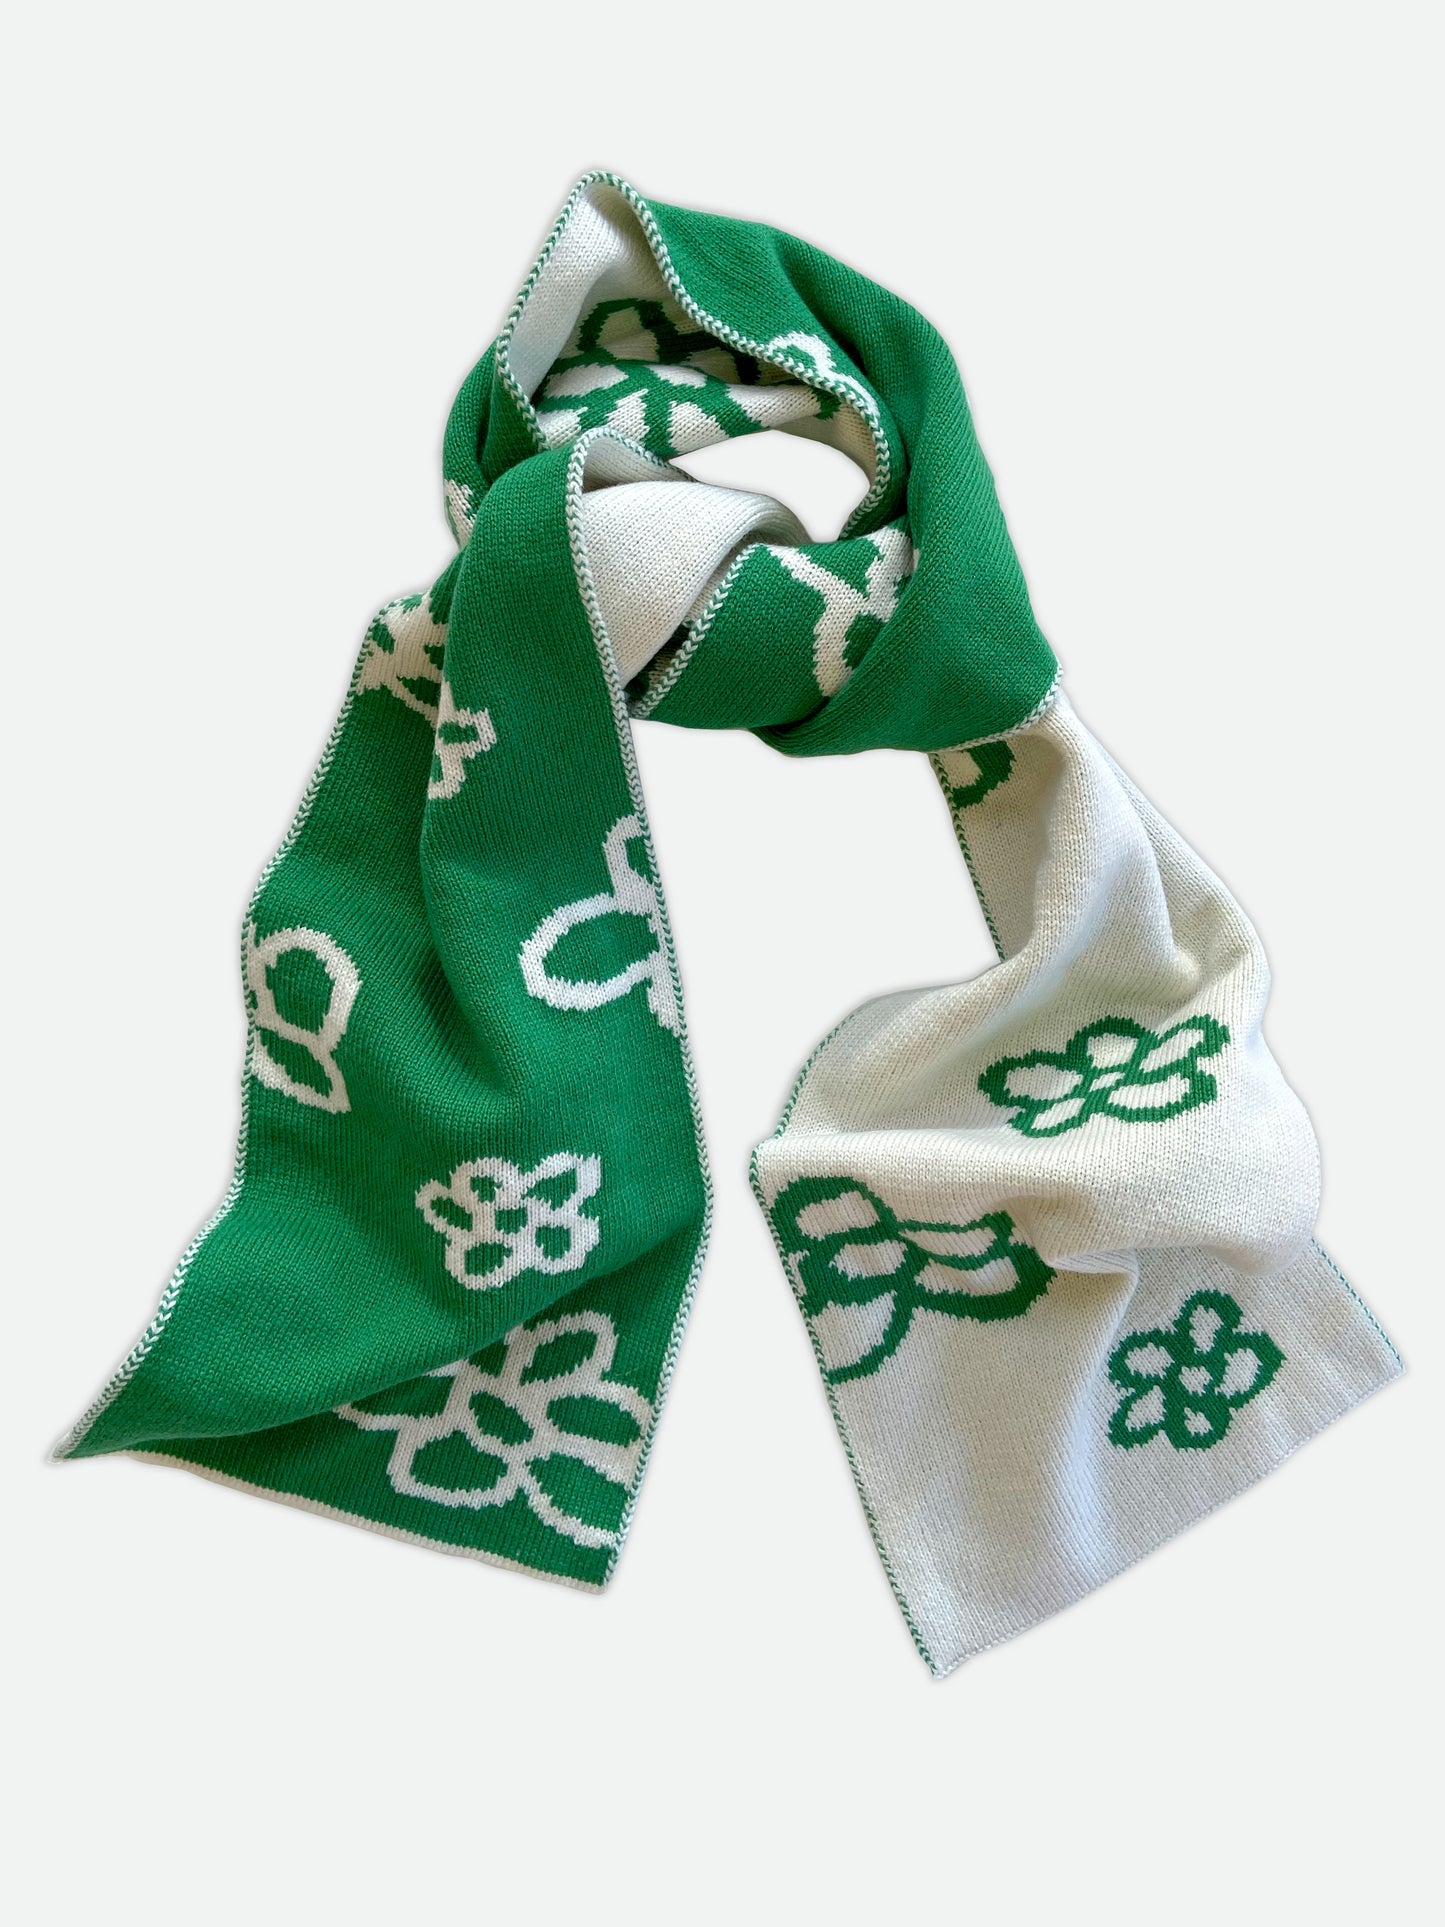 Daisy Wool and Cashmere Scarf in Jade Green Made to Order